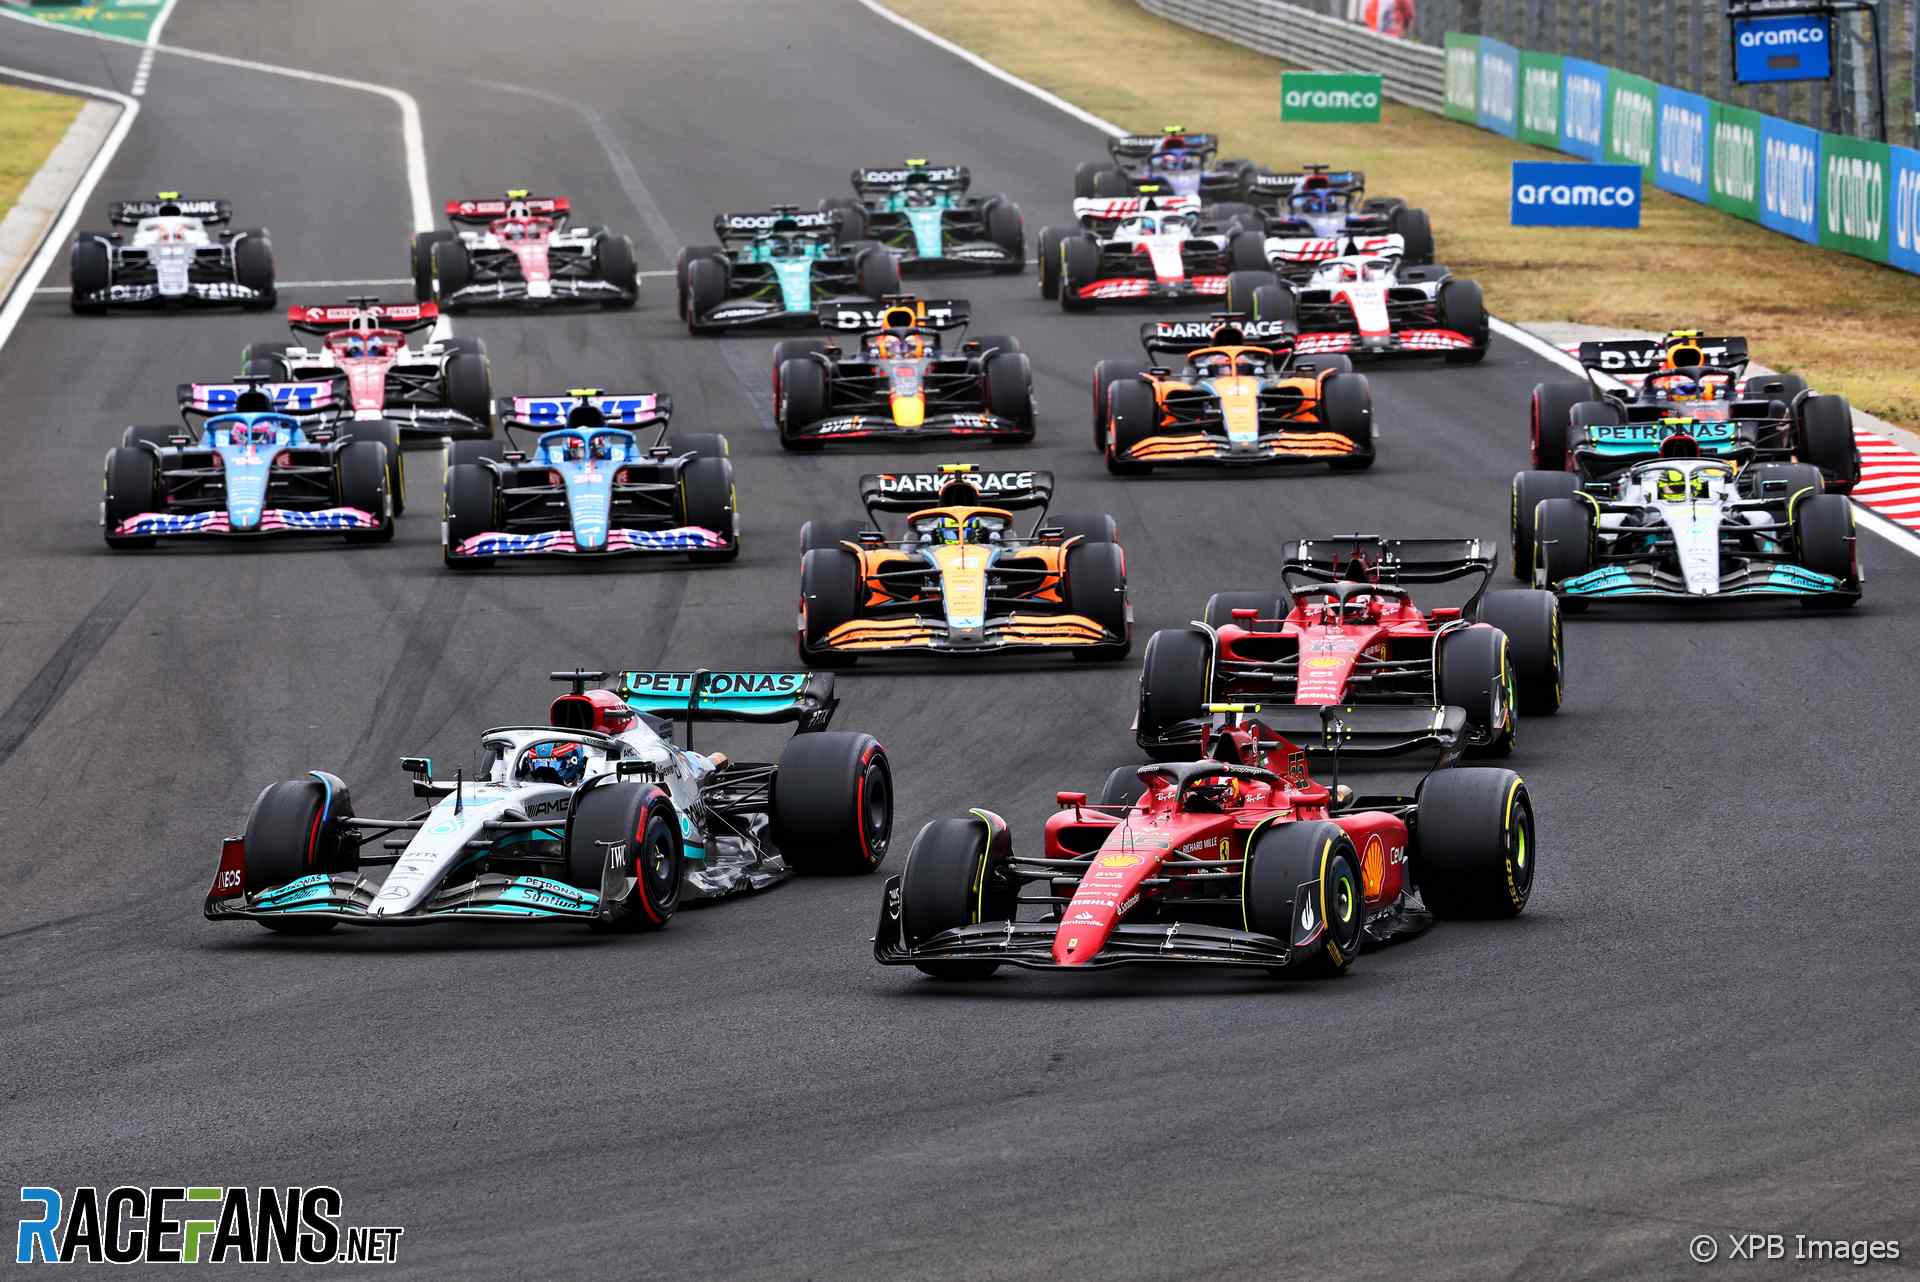 The 2022 Hungarian Grand Prix was held at Hungaroring and won by Max Verstappen